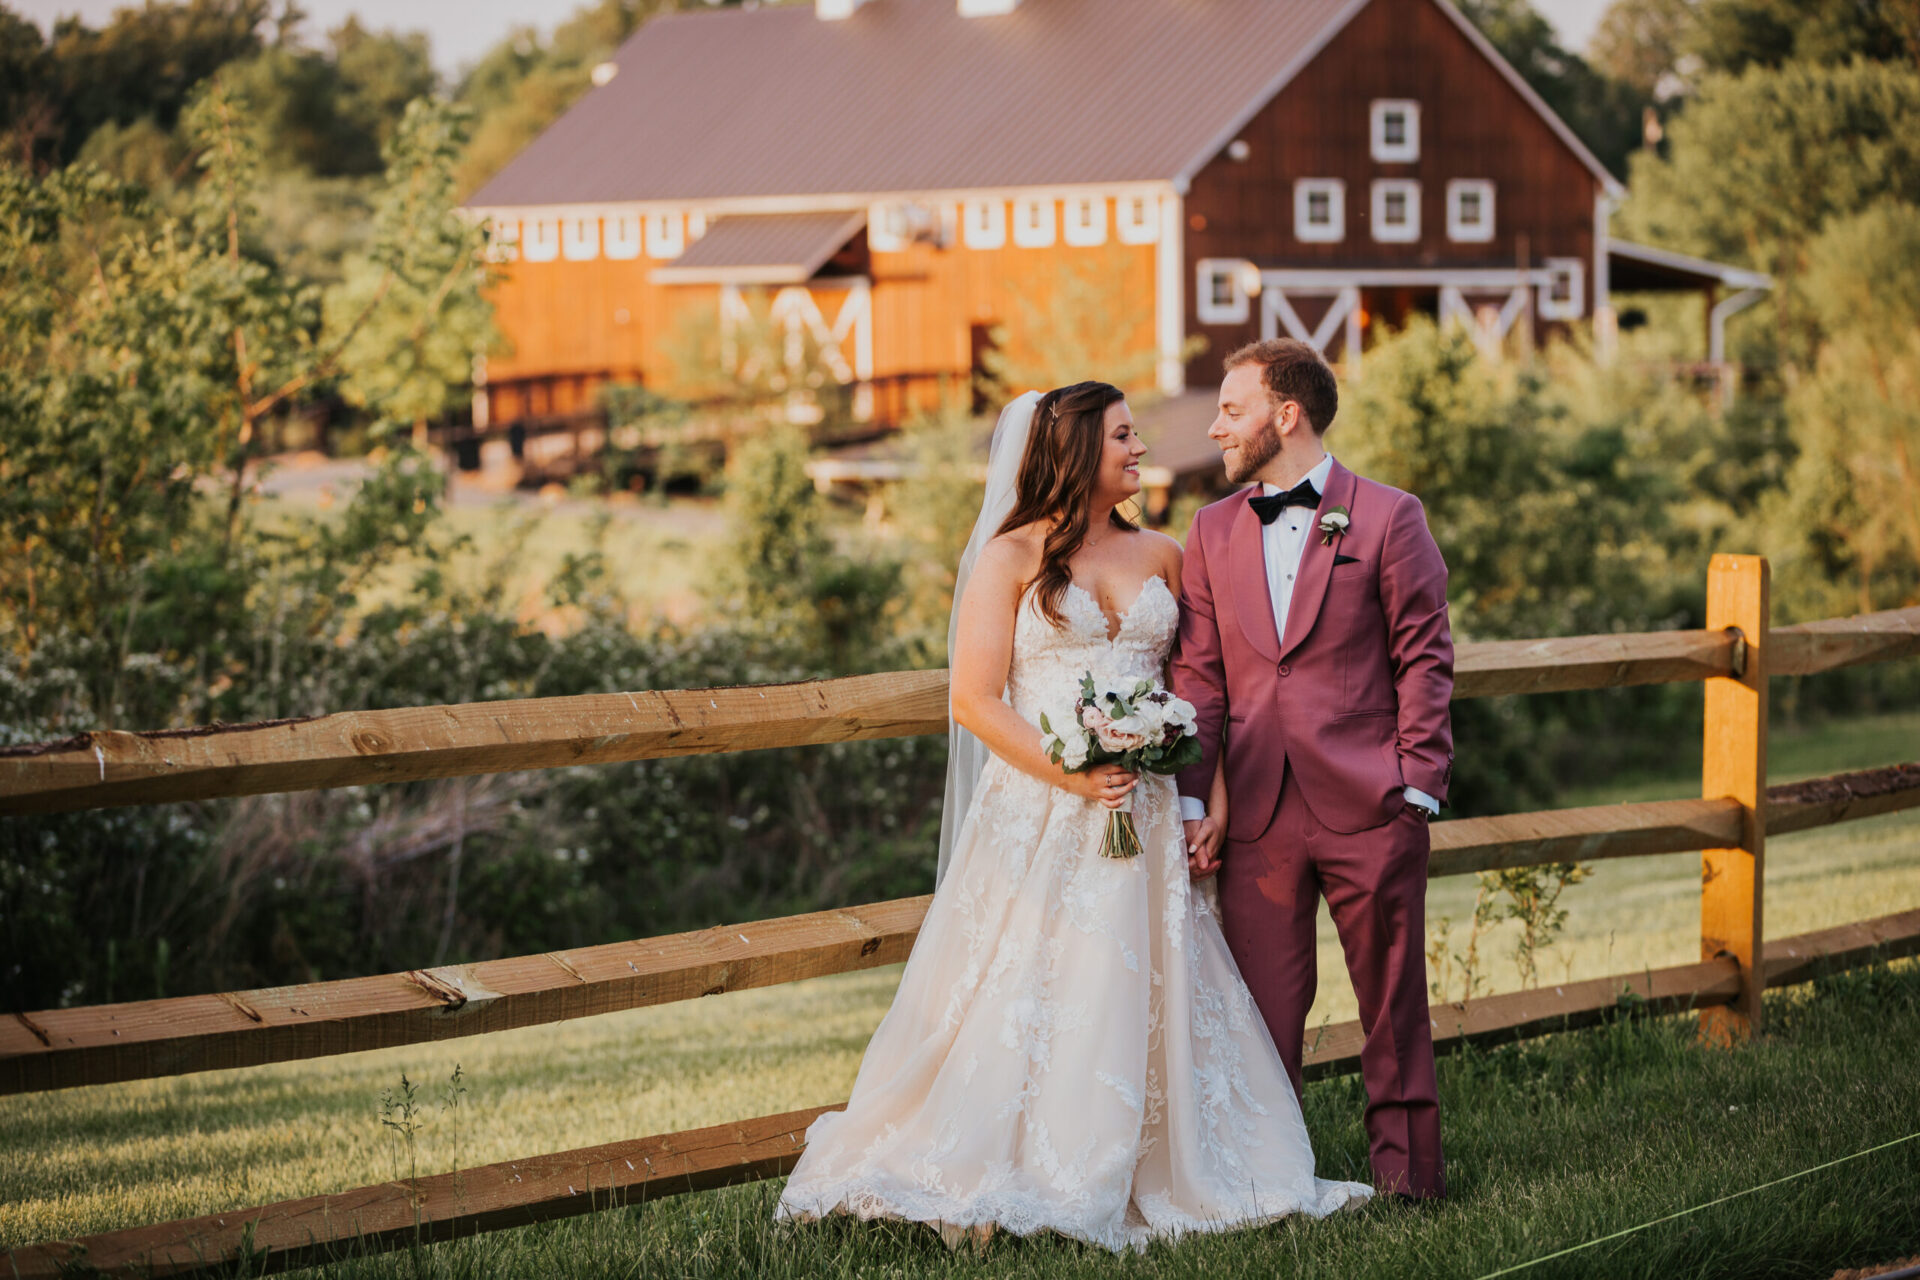 Zion Springs bride and groom wooden fence rustic barn